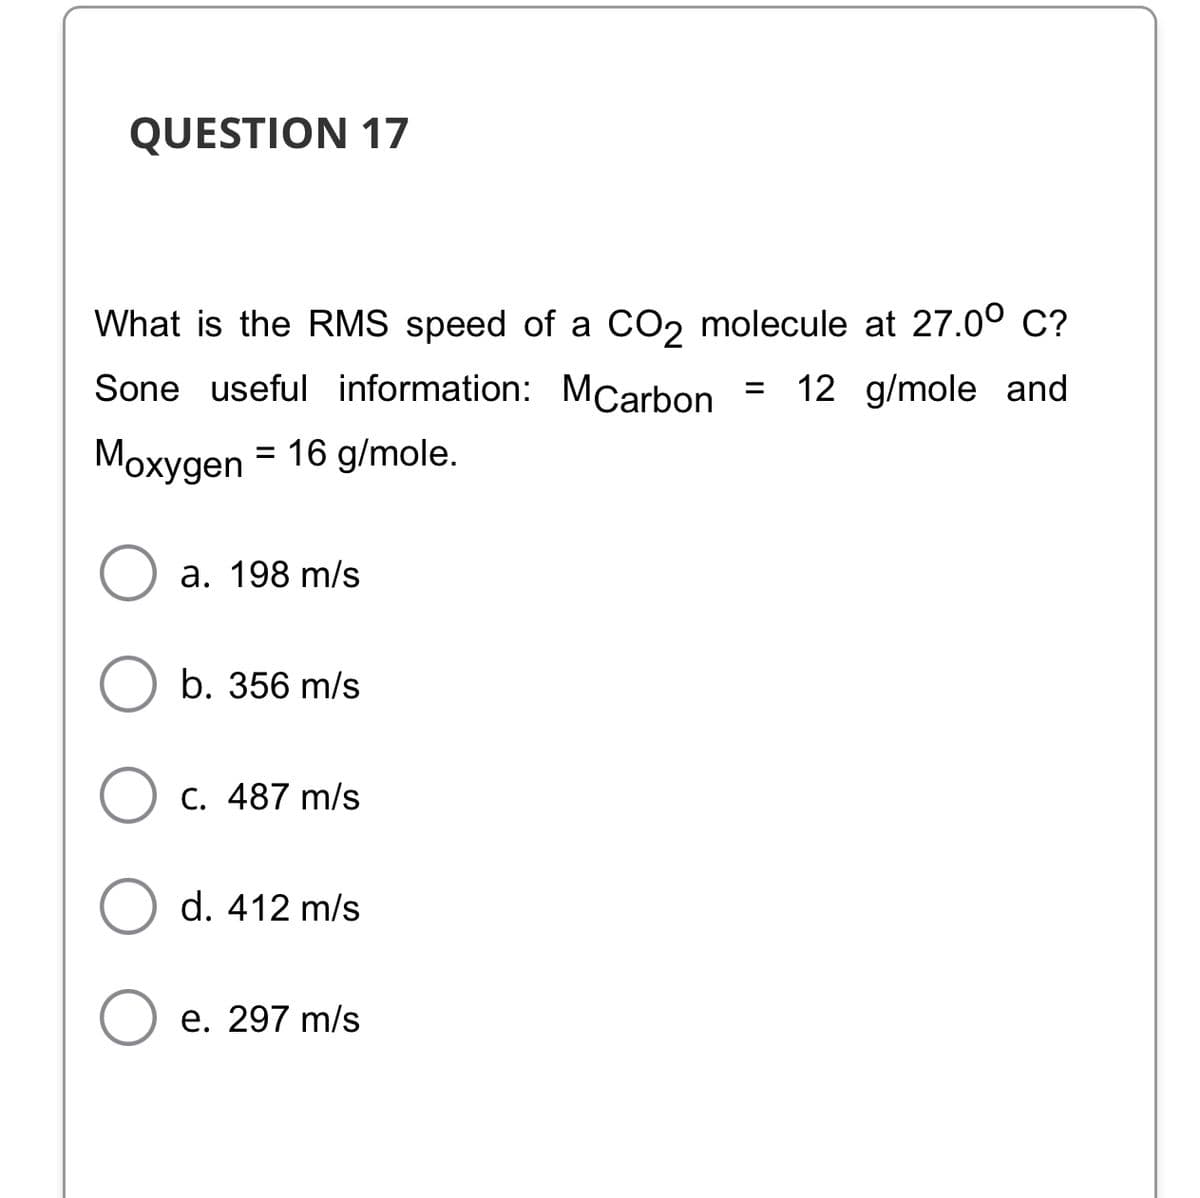 QUESTION 17
What is the RMS speed of a CO2 molecule at 27.00 C?
Sone useful information: MCarbon =
12 g/mole and
Mохудen
= 16 g/mole.
%D
a. 198 m/s
b. 356 m/s
C. 487 m/s
d. 412 m/s
e. 297 m/s
